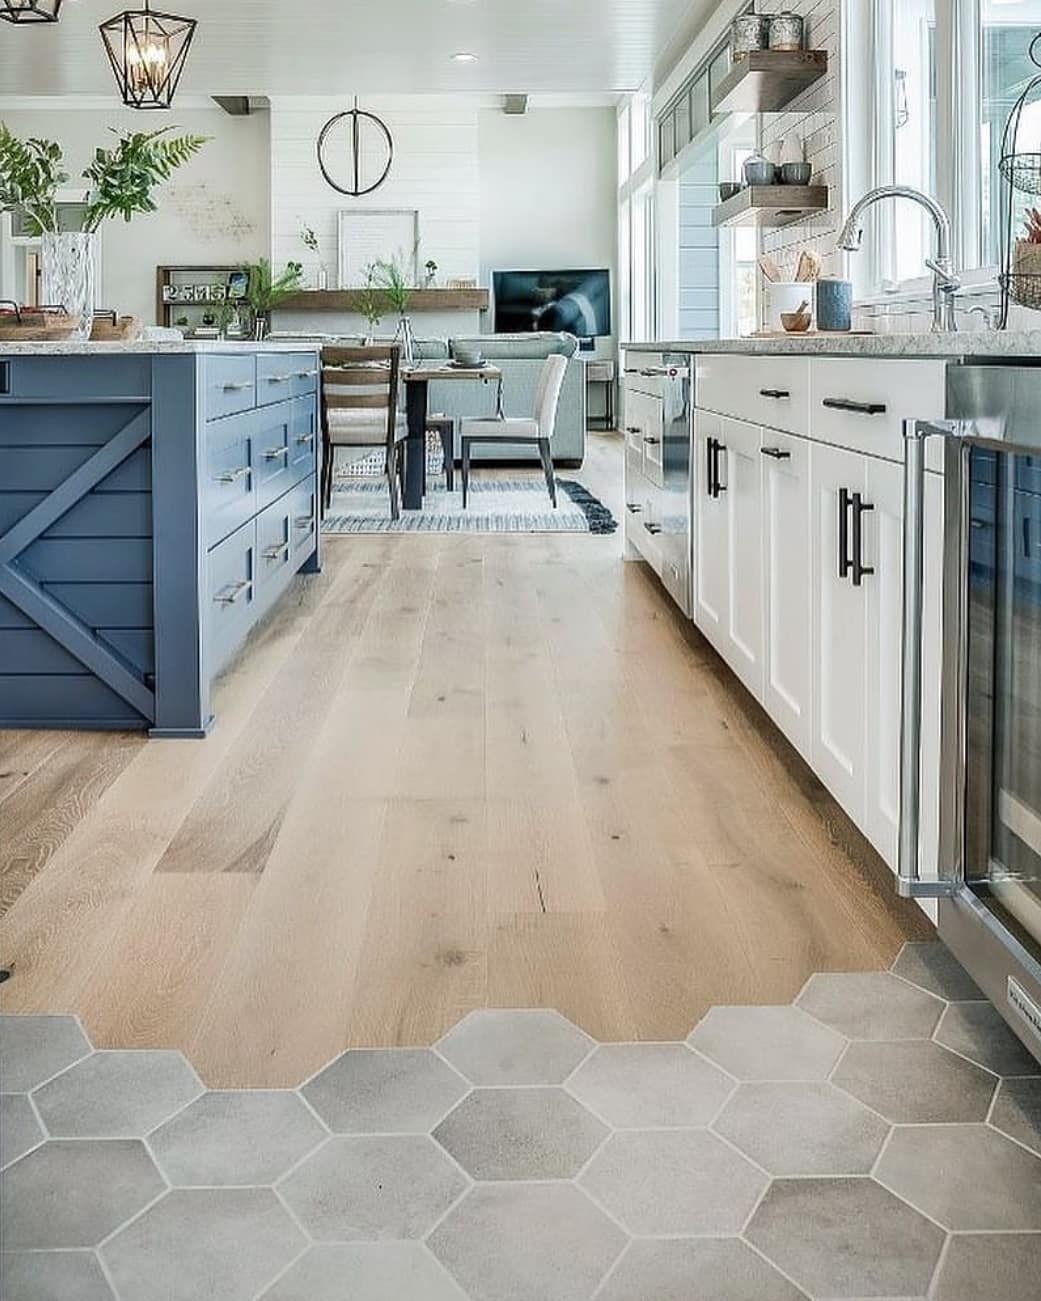 A kitchen wooden flooring transitioning to a bee hive tile flooring. Photo by Instagram username @cranberry_design